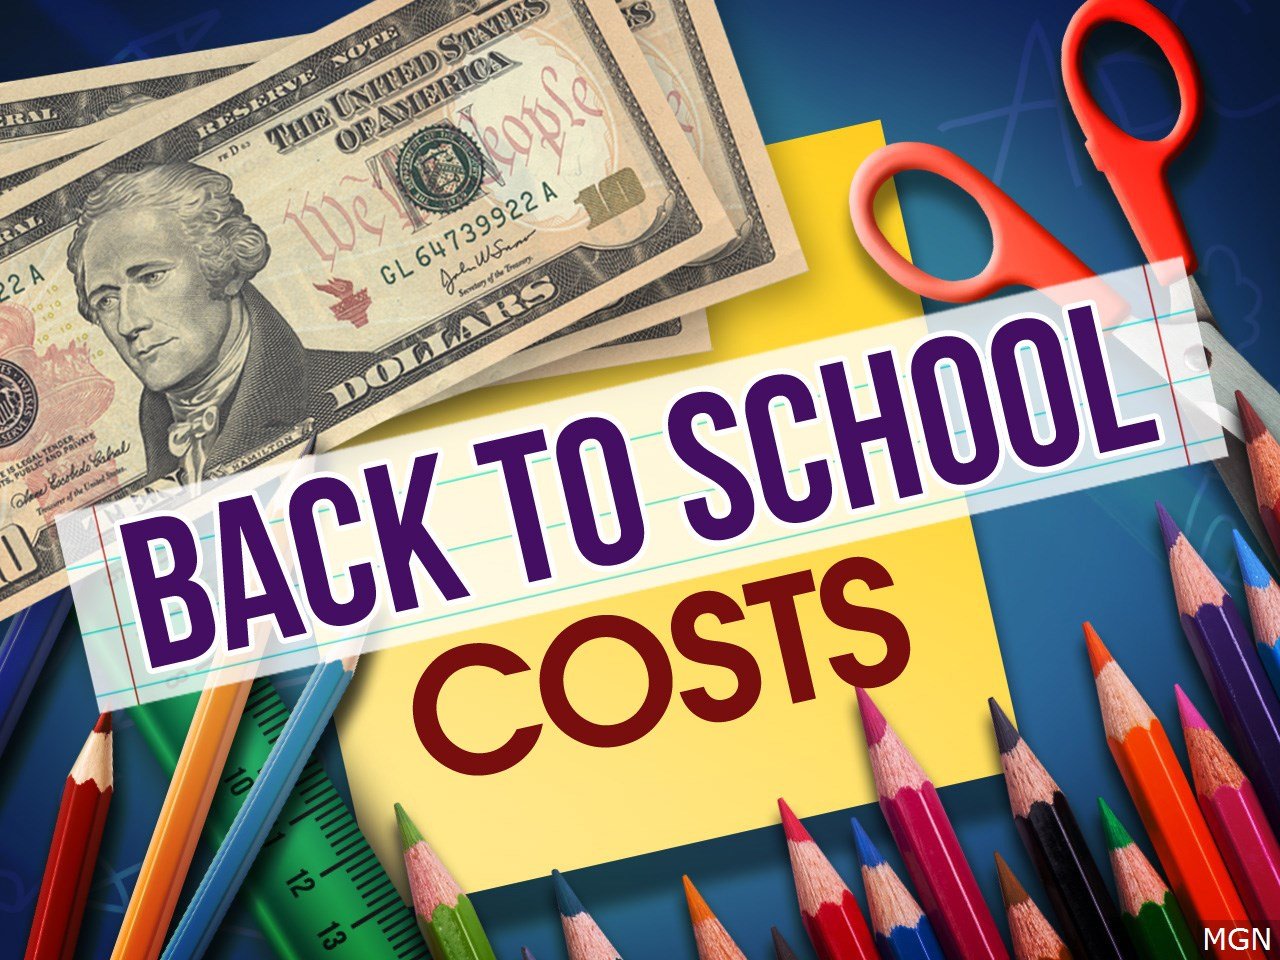 Back to School costs reach new record high